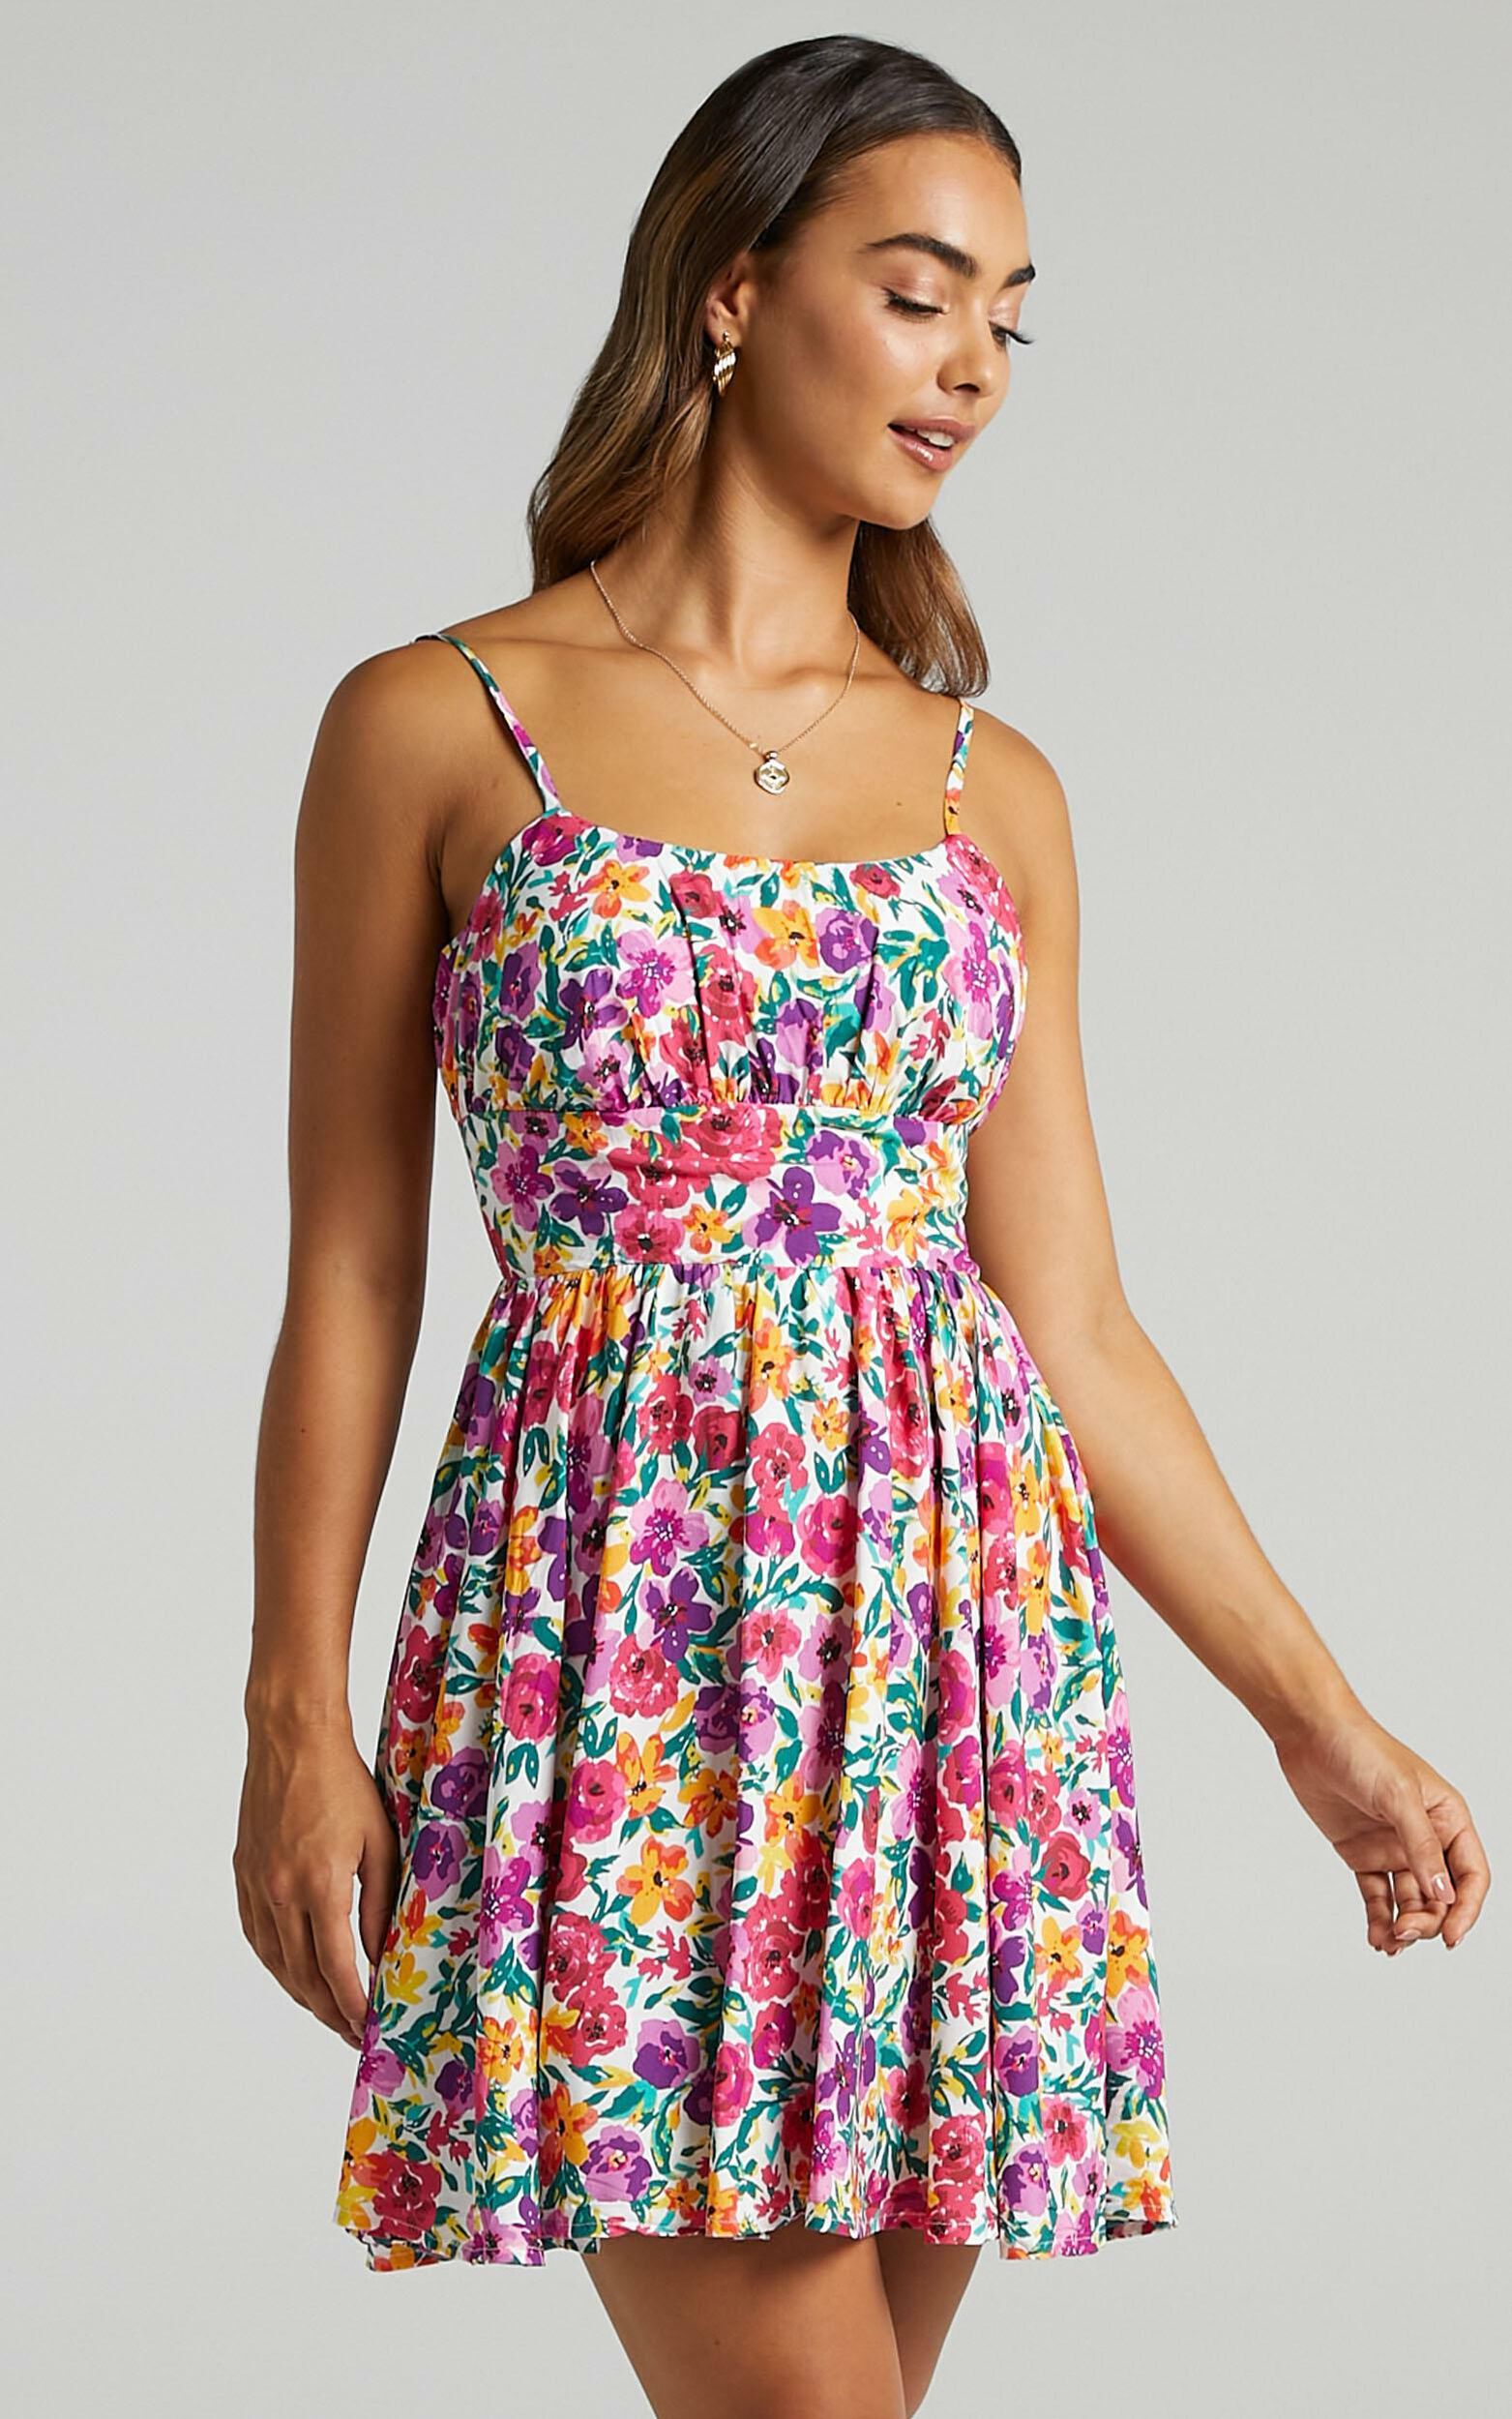 Summer Jam Sweetheart Mini Dress in Packed Floral - 06, MLT4